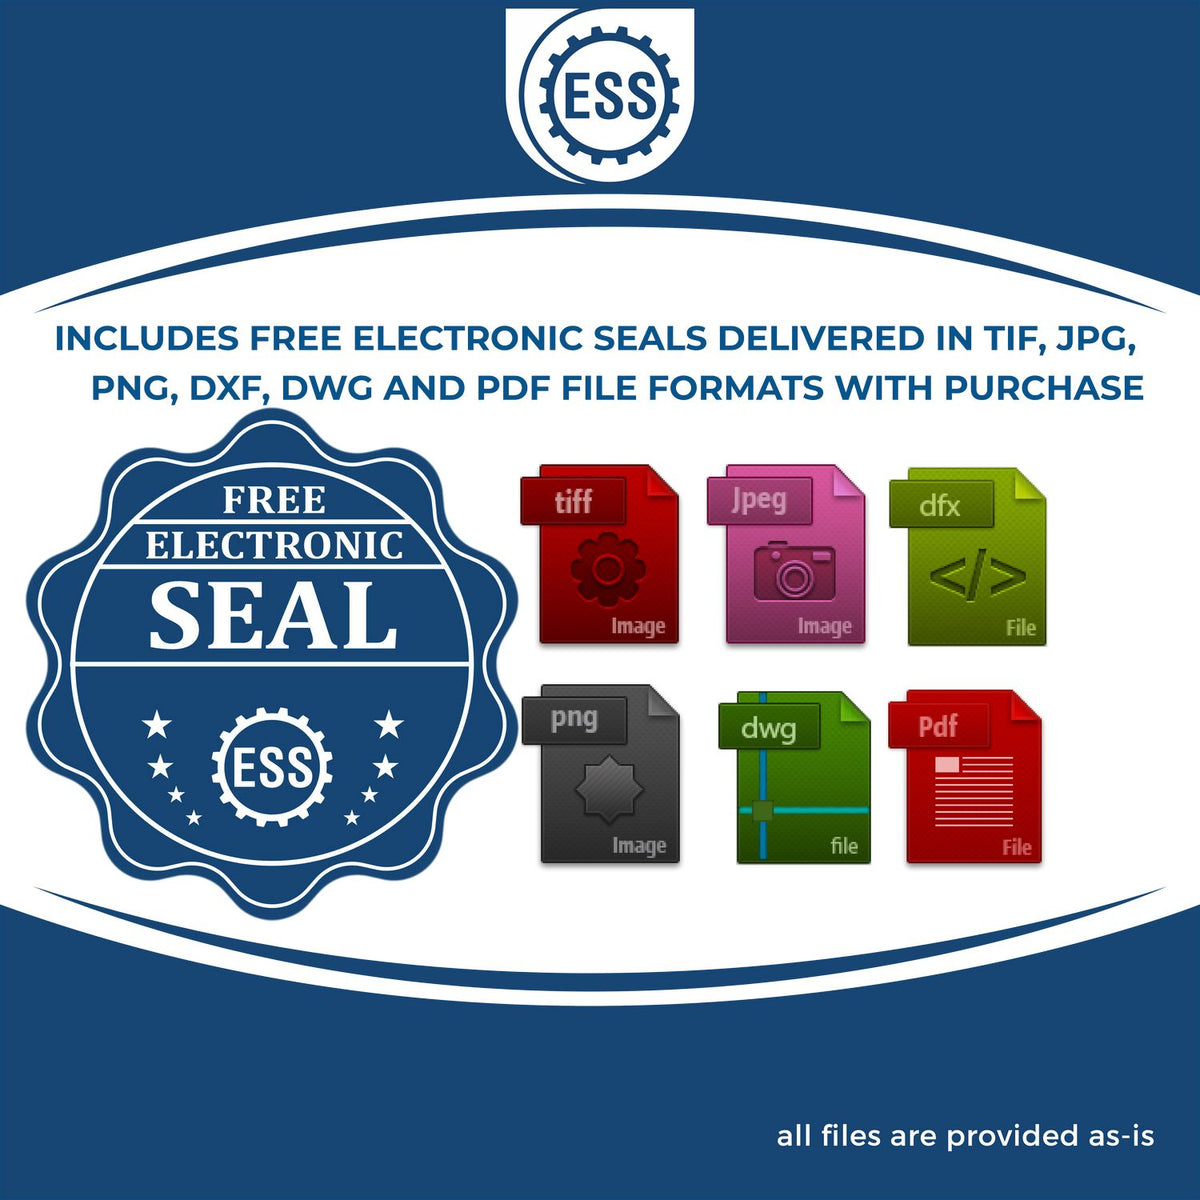 An infographic for the free electronic seal for the Heavy Duty Cast Iron Texas Engineer Seal Embosser illustrating the different file type icons such as DXF, DWG, TIF, JPG and PNG.